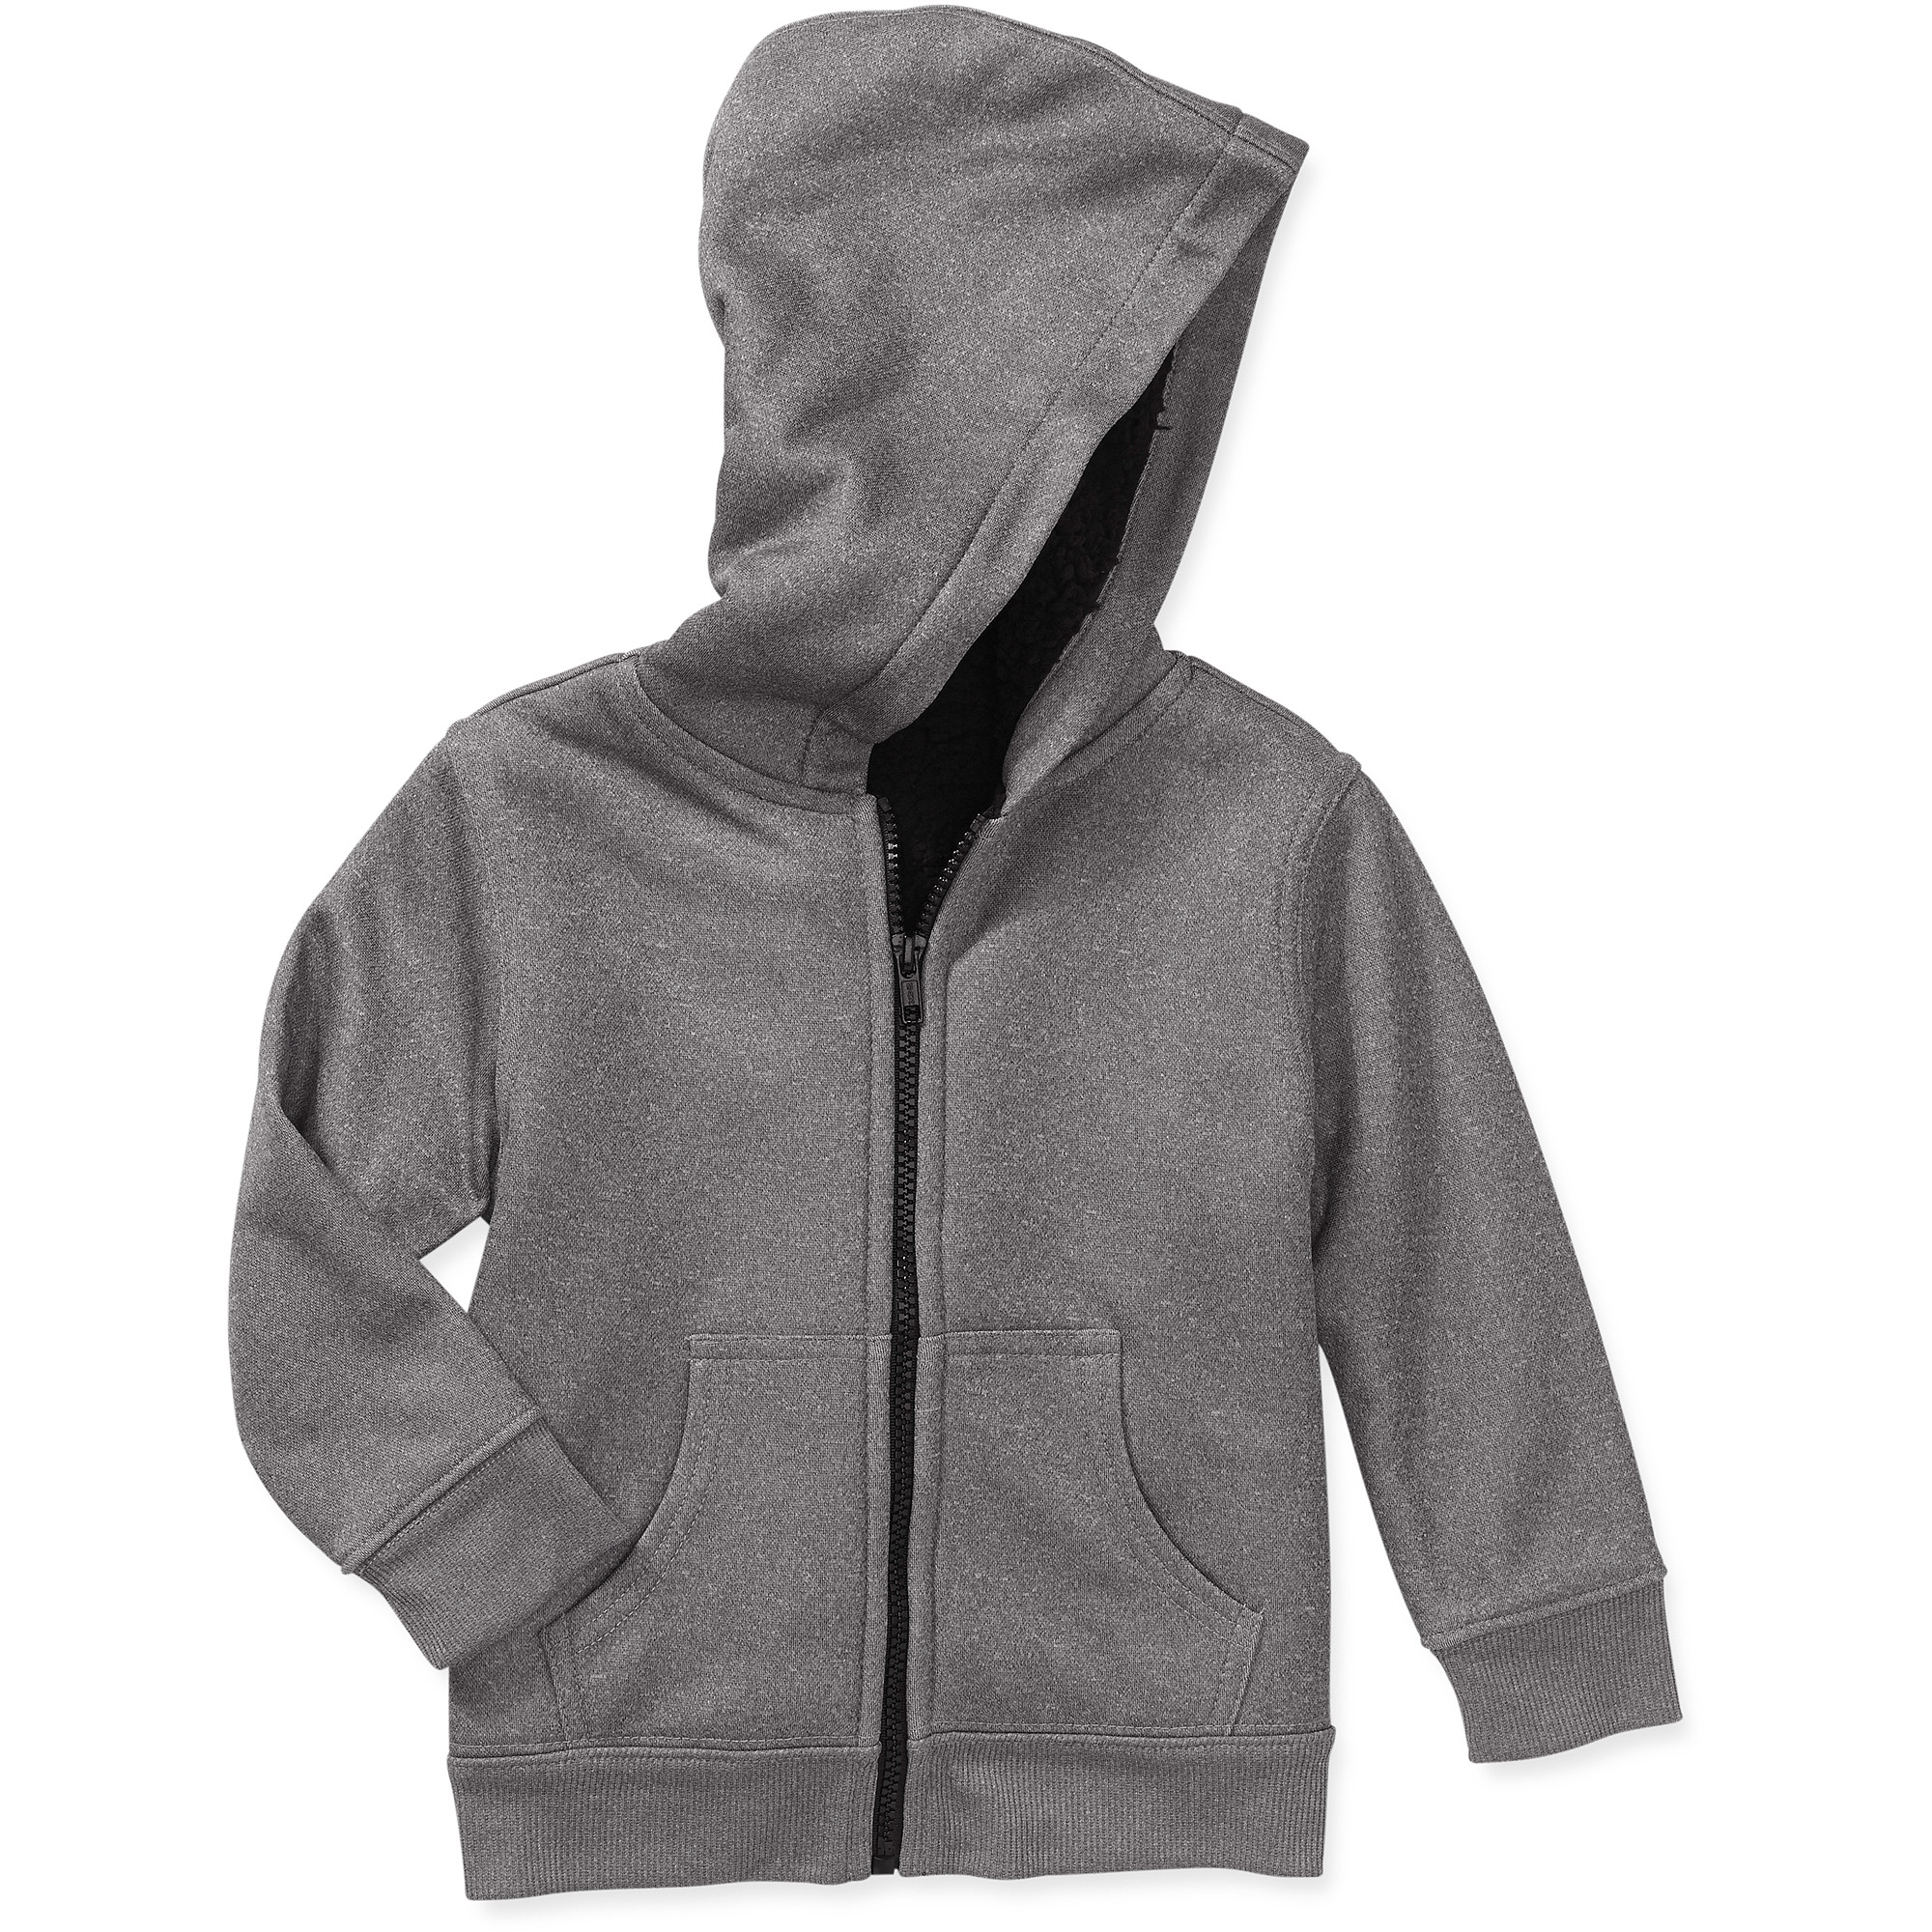 Inf Boys Sherpa Lined Hoodies - image 1 of 1